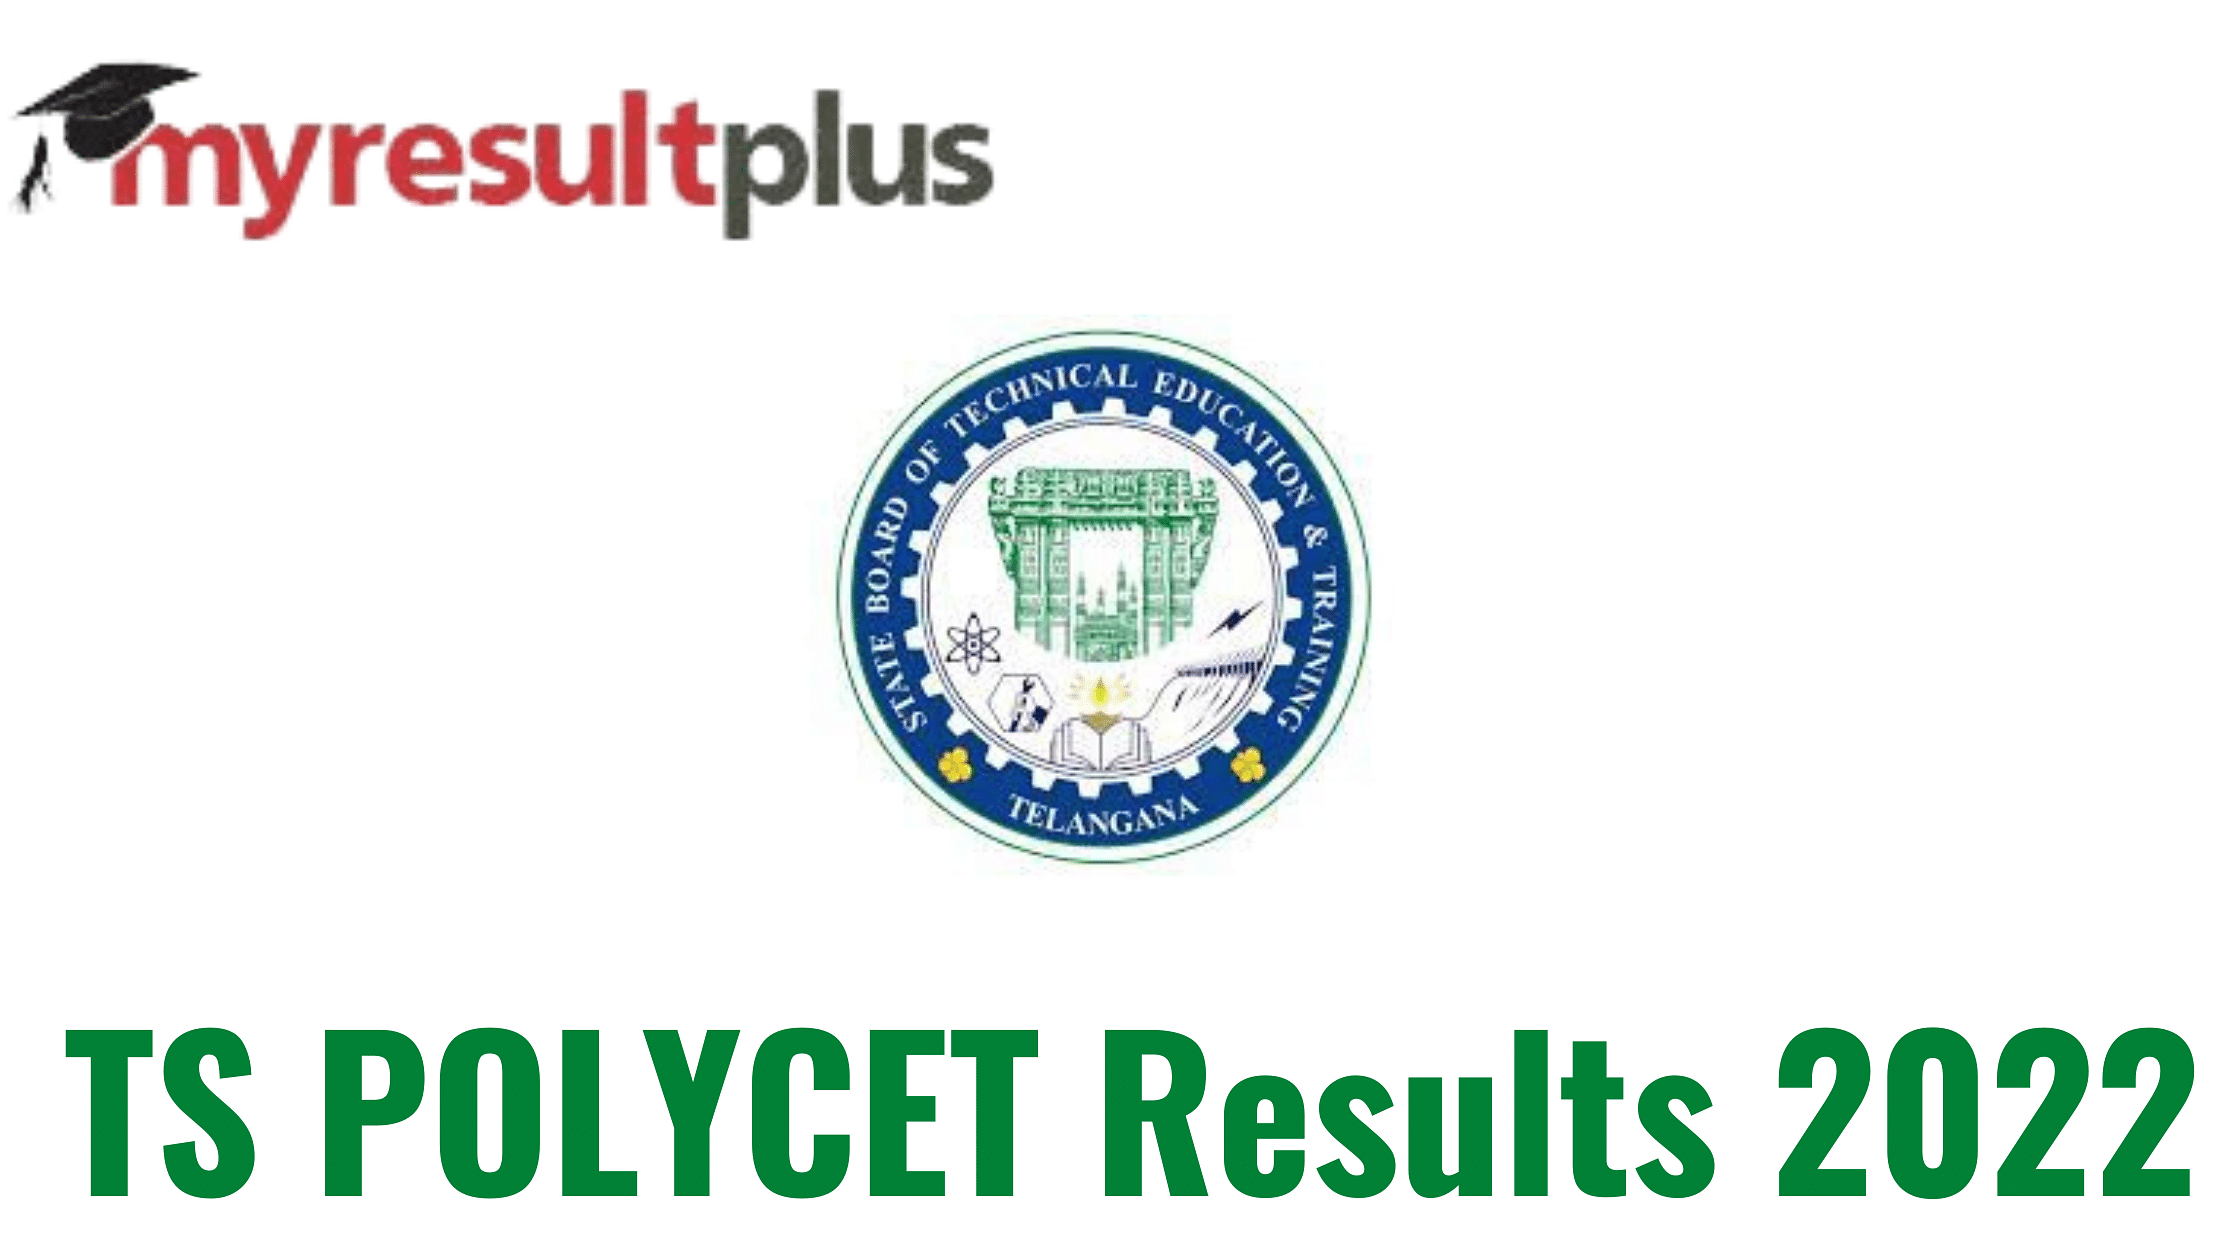 TS POLYCET Results 2022 To Be Out Soon, Know How to Download Scorecards Here